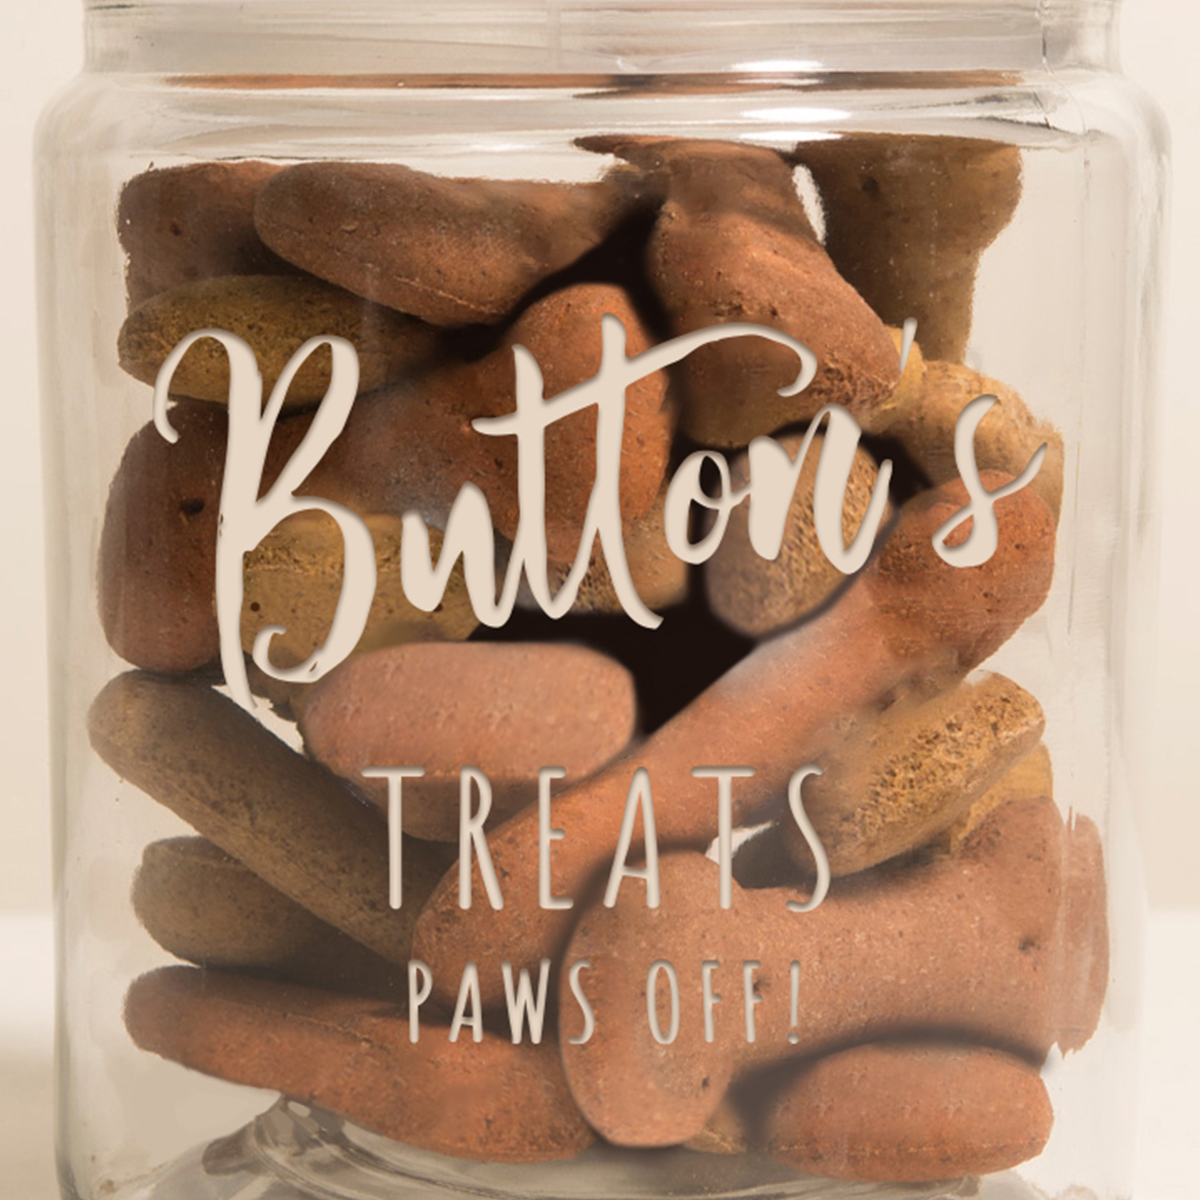 Personalised Dog Treats Glass Jar - Paws Off